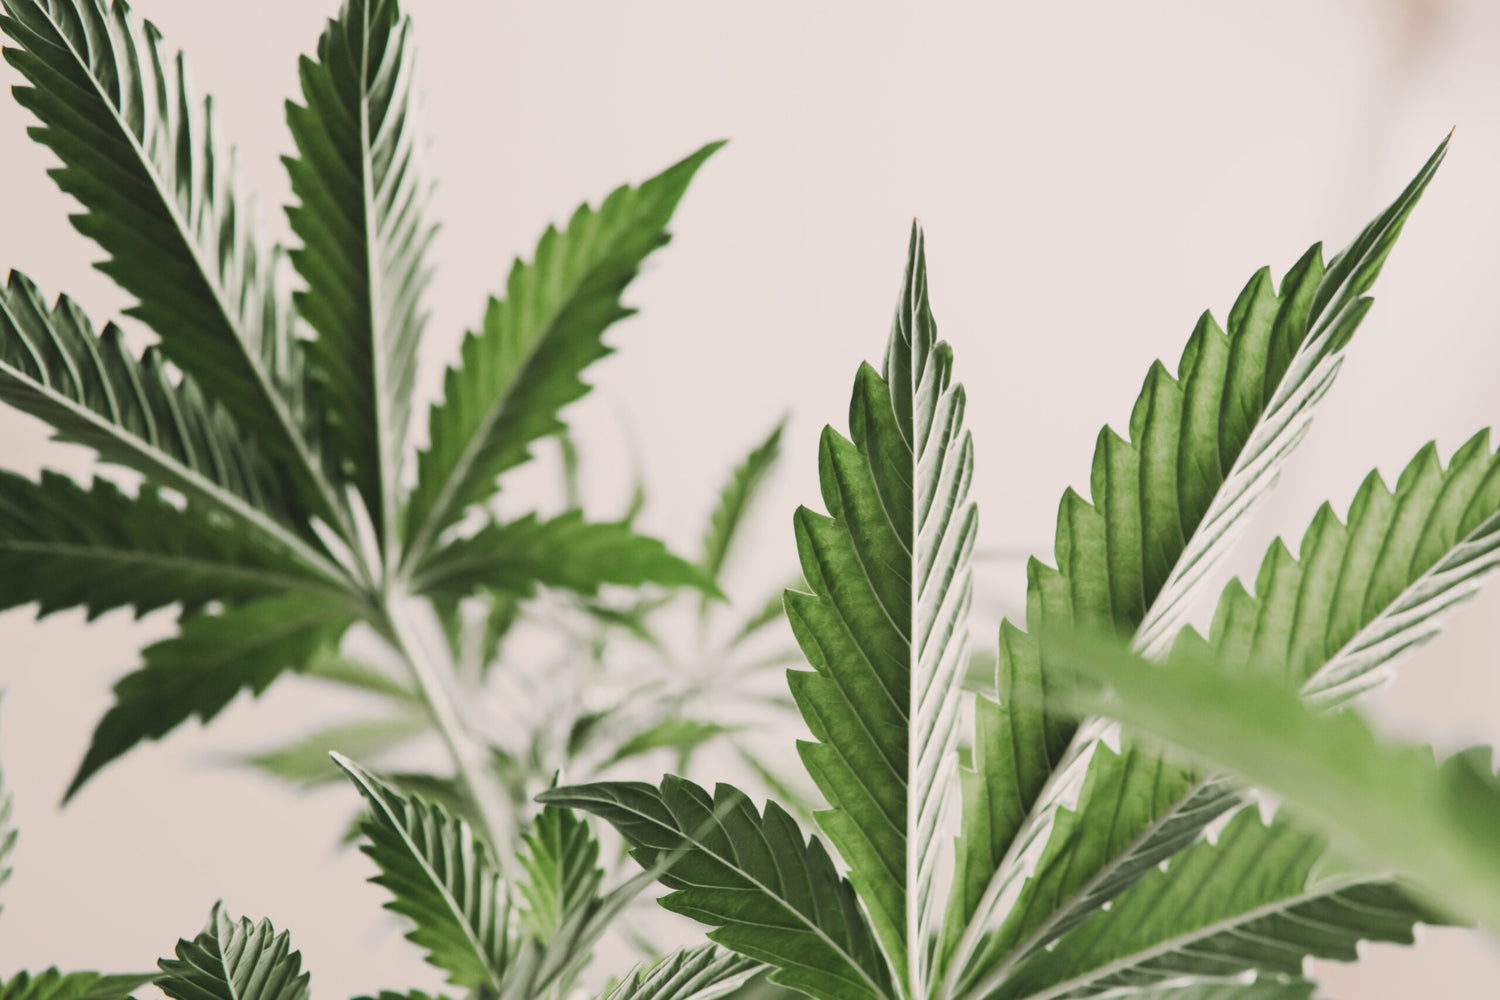 Schwazze To Acquire Brow 2&#8217;s Indoor Cultivation Operation In Denver